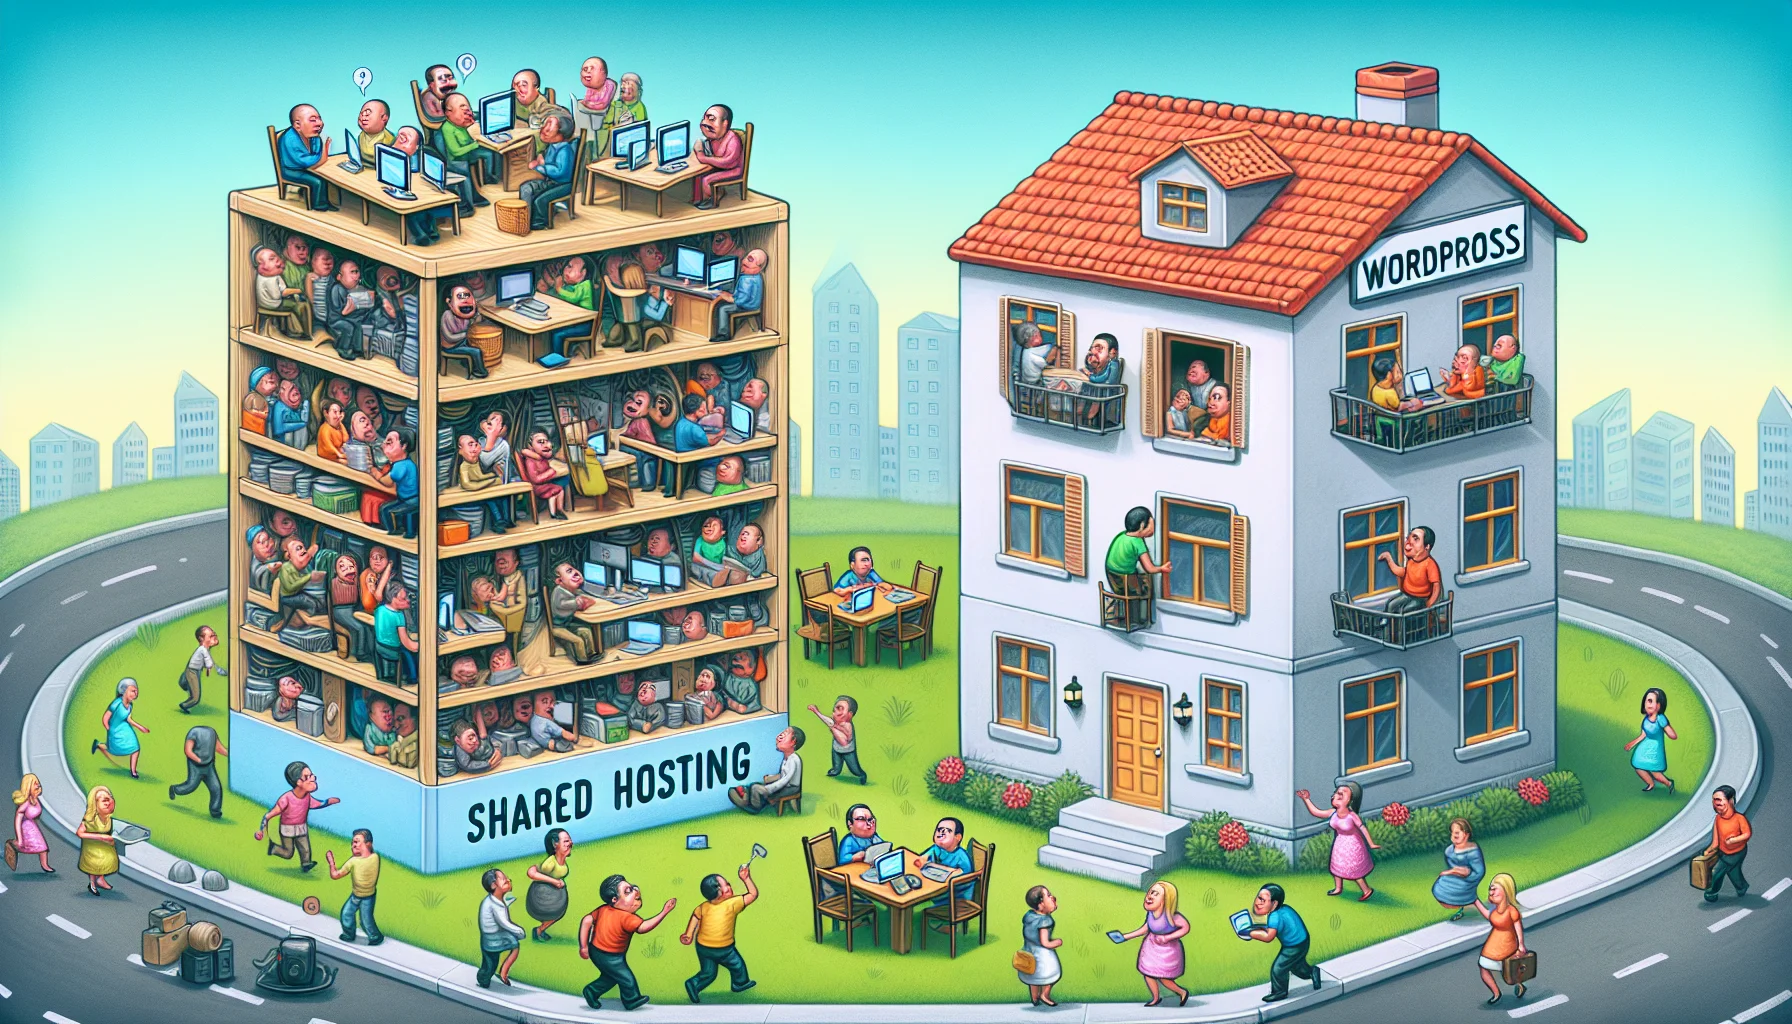 Depict a humorous yet realistic scene of a shared hosting represented as a bustling, chaotic city apartment with many diverse people trying to fit inside. Each person in the apartment is industriously operating a small website. Nearby, show WordPress hosting represented as a calm suburban bungalow with one Caucasian woman, one Hispanic man, each peacefully managing a larger, more efficient website. Make sure the contrast between the two scenarios is exaggerated for comedic effect, highlighting both the benefits and challenges of each hosting option, in an enticing way that caught the viewers' interest in web hosting.